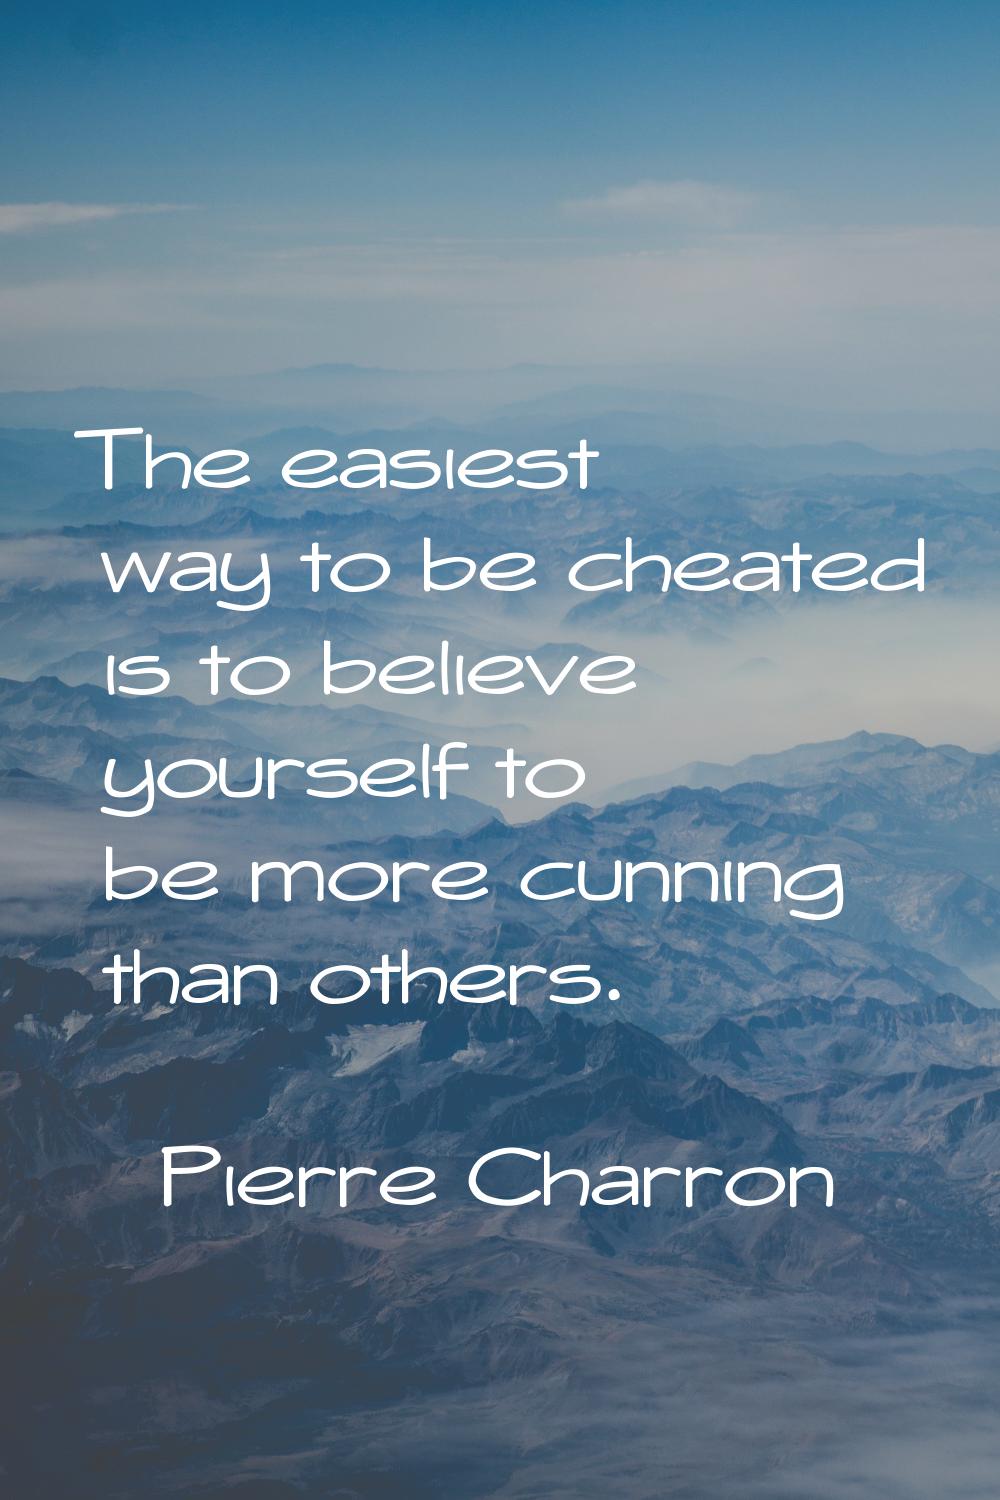 The easiest way to be cheated is to believe yourself to be more cunning than others.